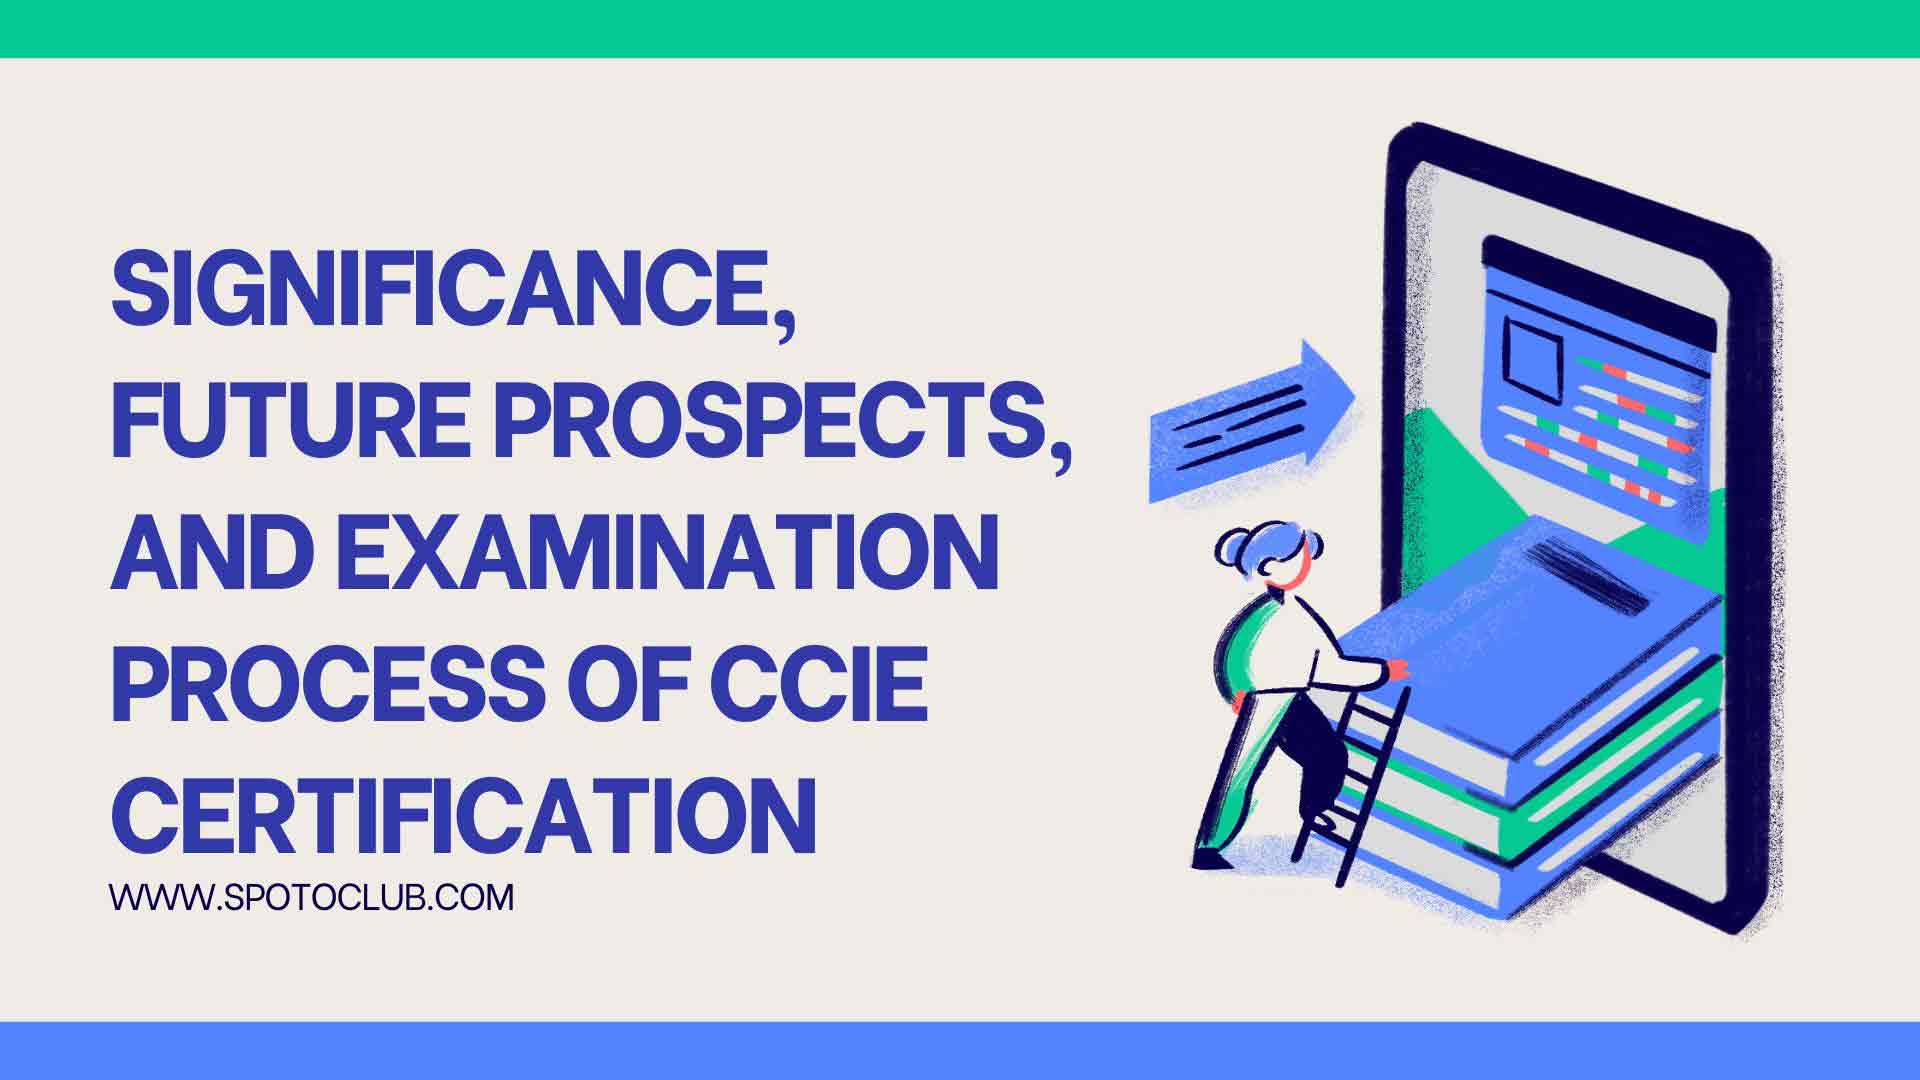 Significance, Future Prospects, and Examination Process of CCIE Certification